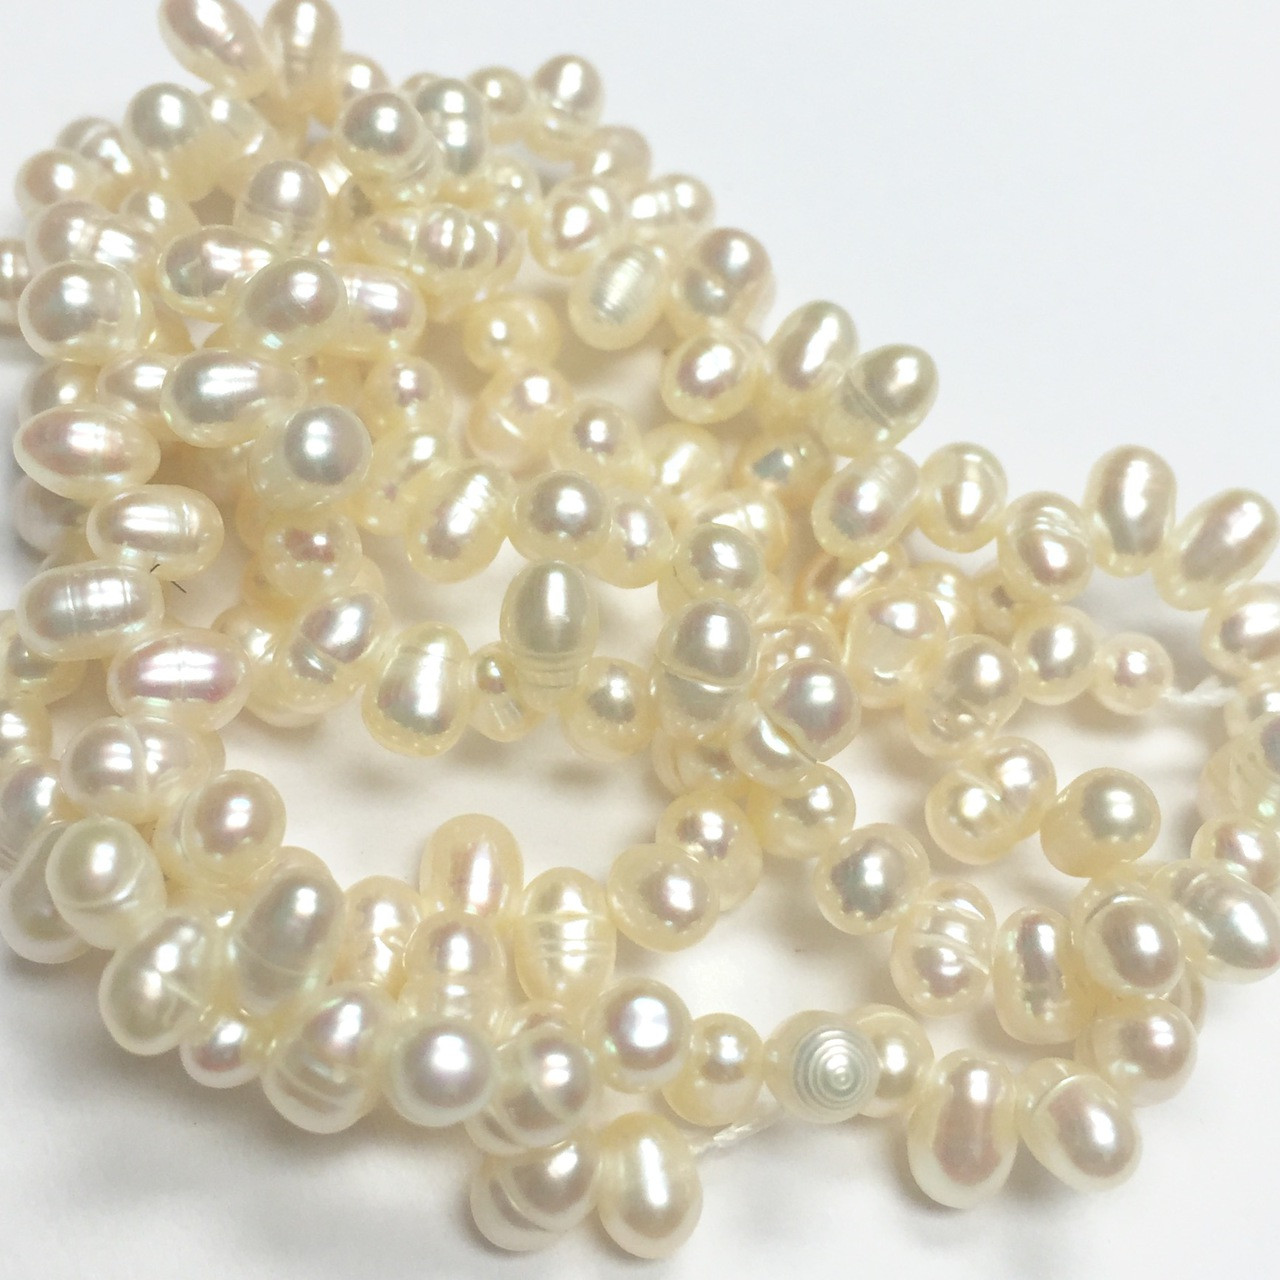 Sweet Ivory Top Drilled Dancing Freshwater Pearls 2.5-3mm - A Grain of Sand